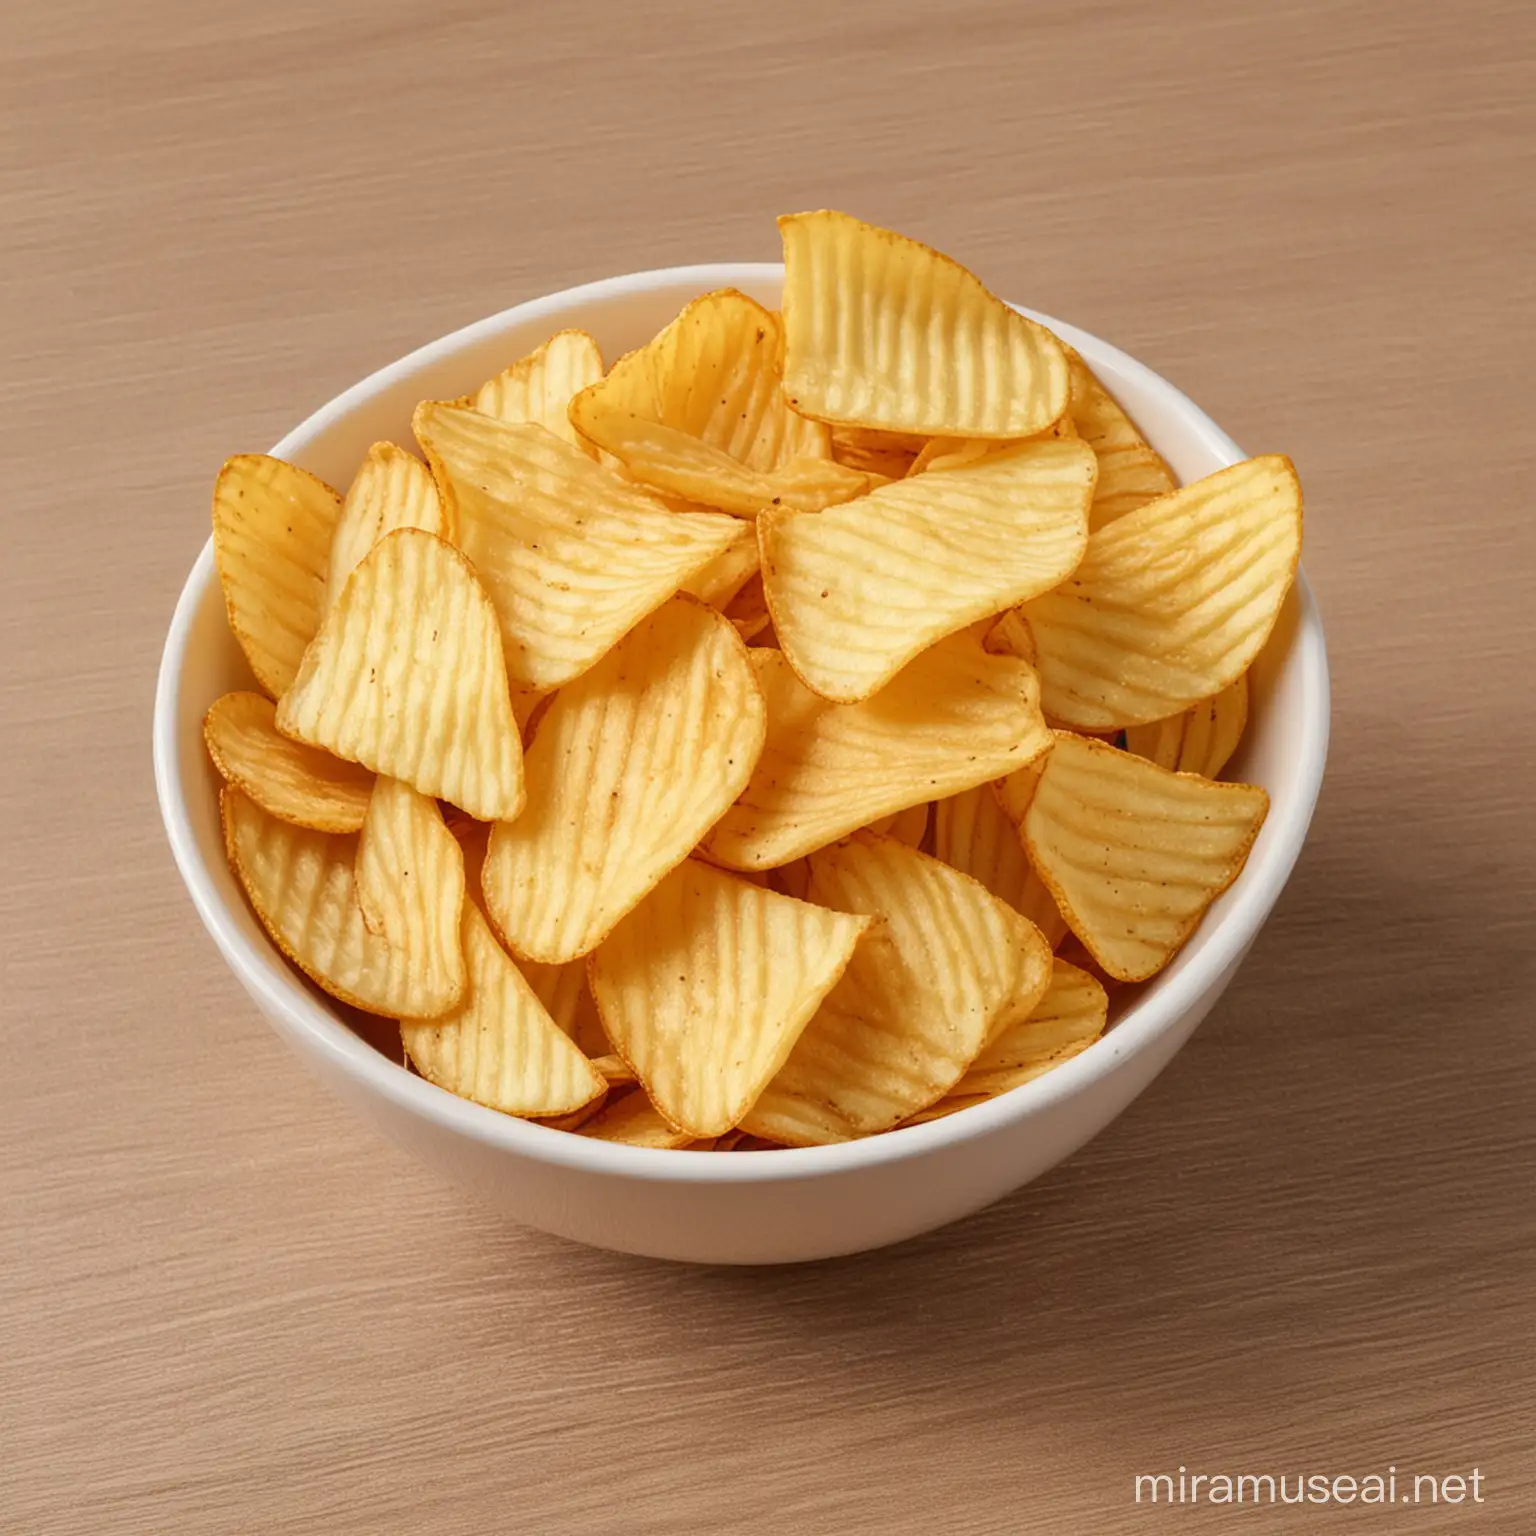 There are potato chips in the bowl